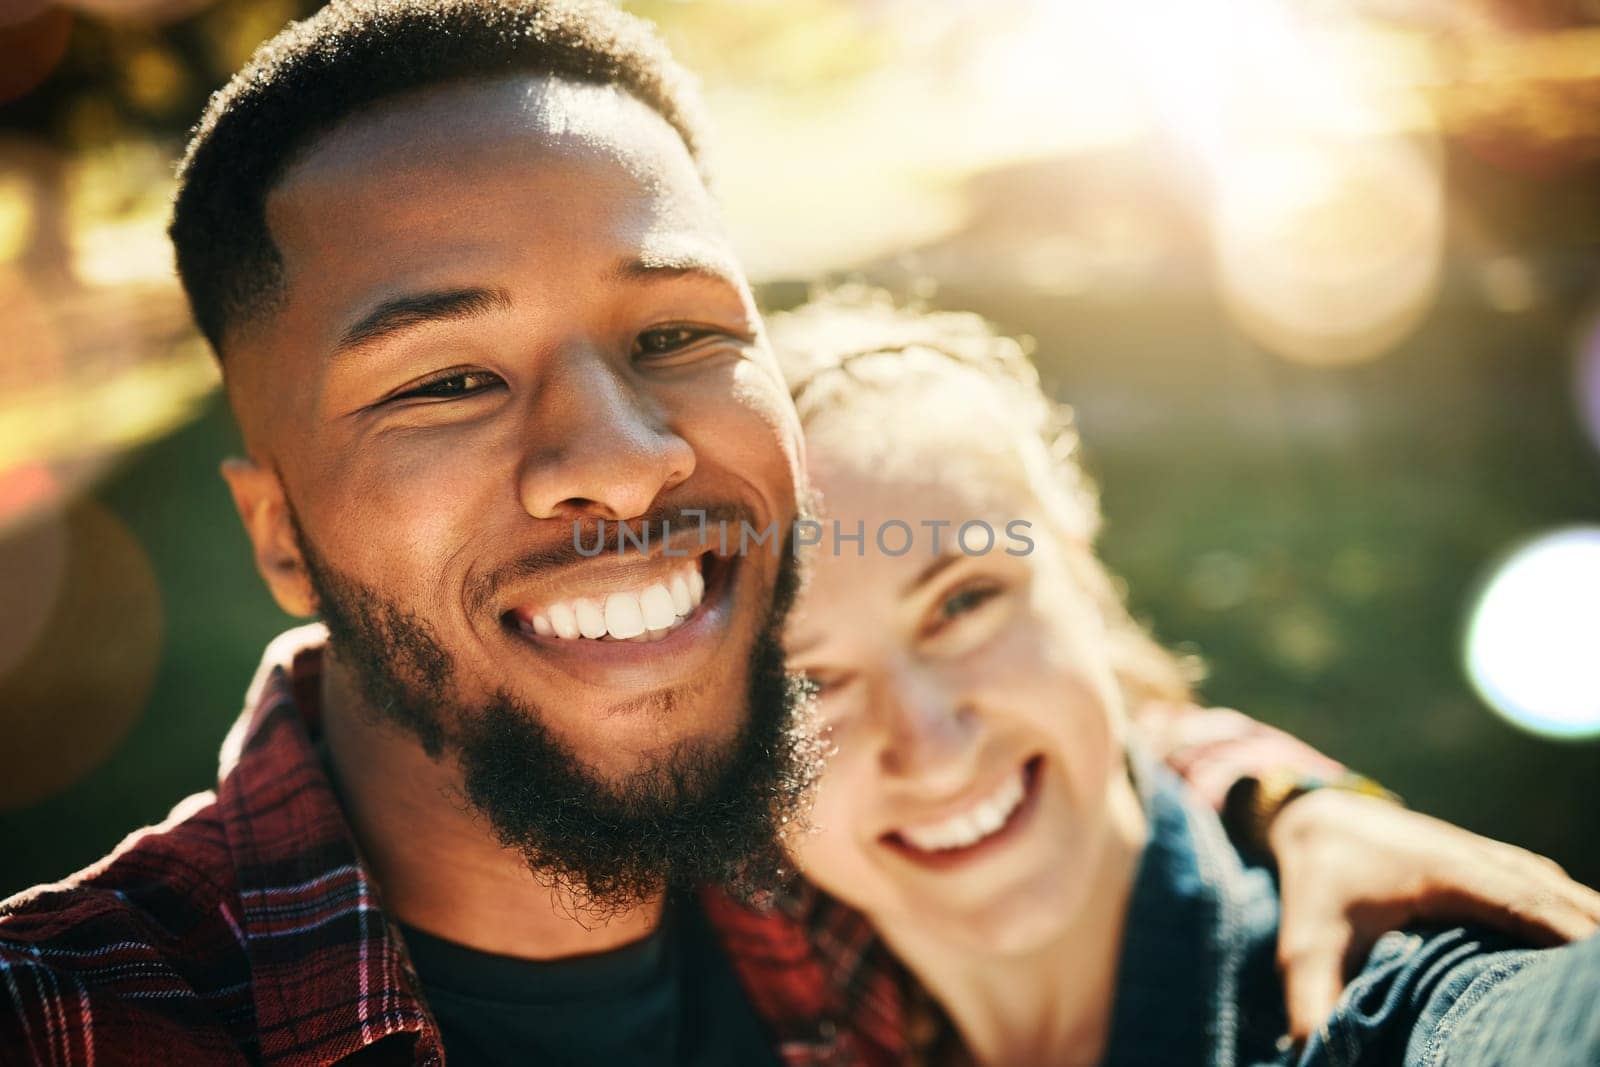 Couple, love selfie and portrait smile at park outdoors, enjoying fun time and bonding together. Diversity, romance and face of black man and woman taking pictures for happy memory or social media